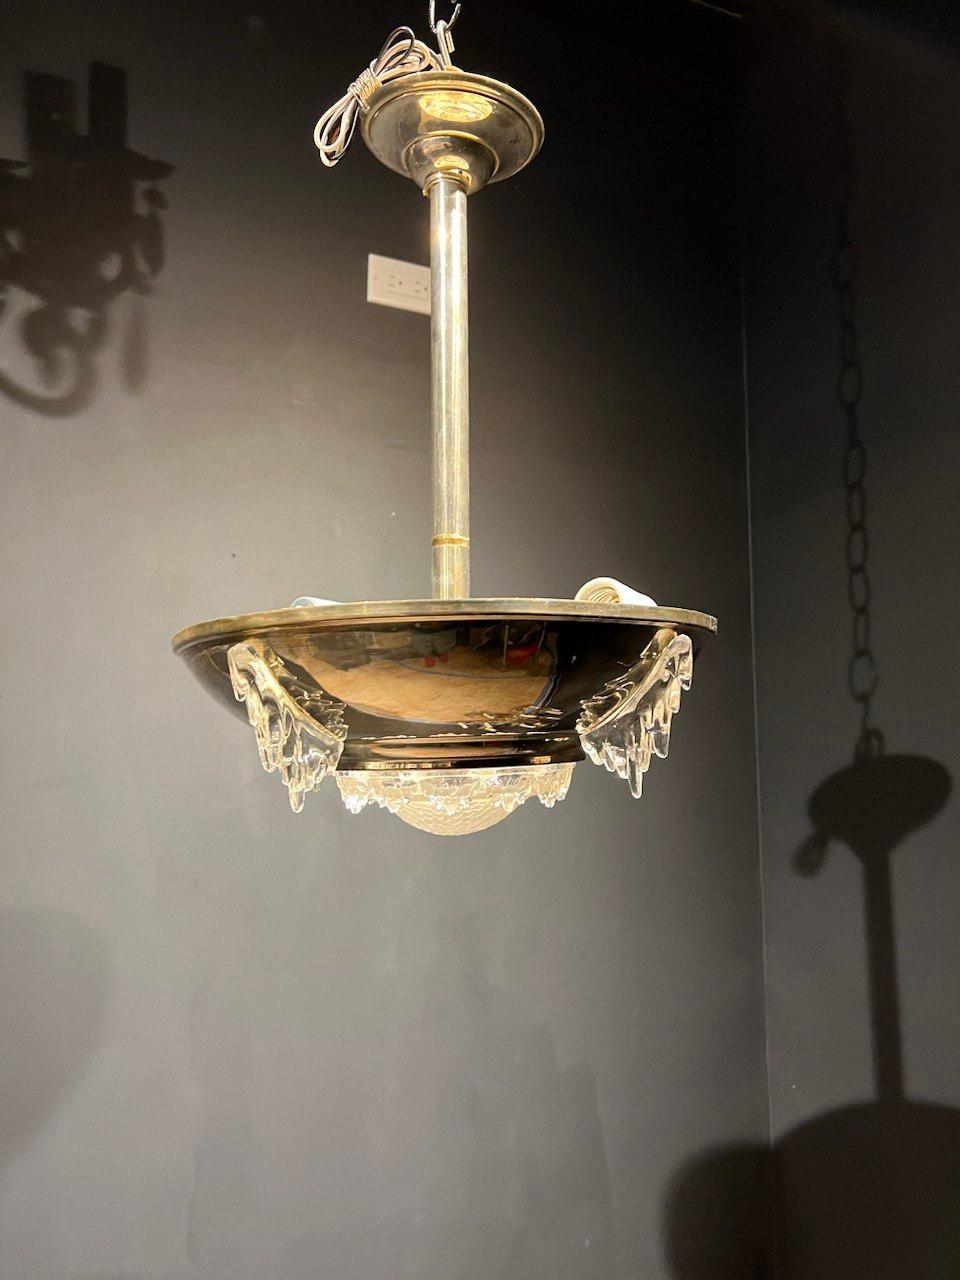 A circa 1930's French Art deco small light fixture with molded glass inset.